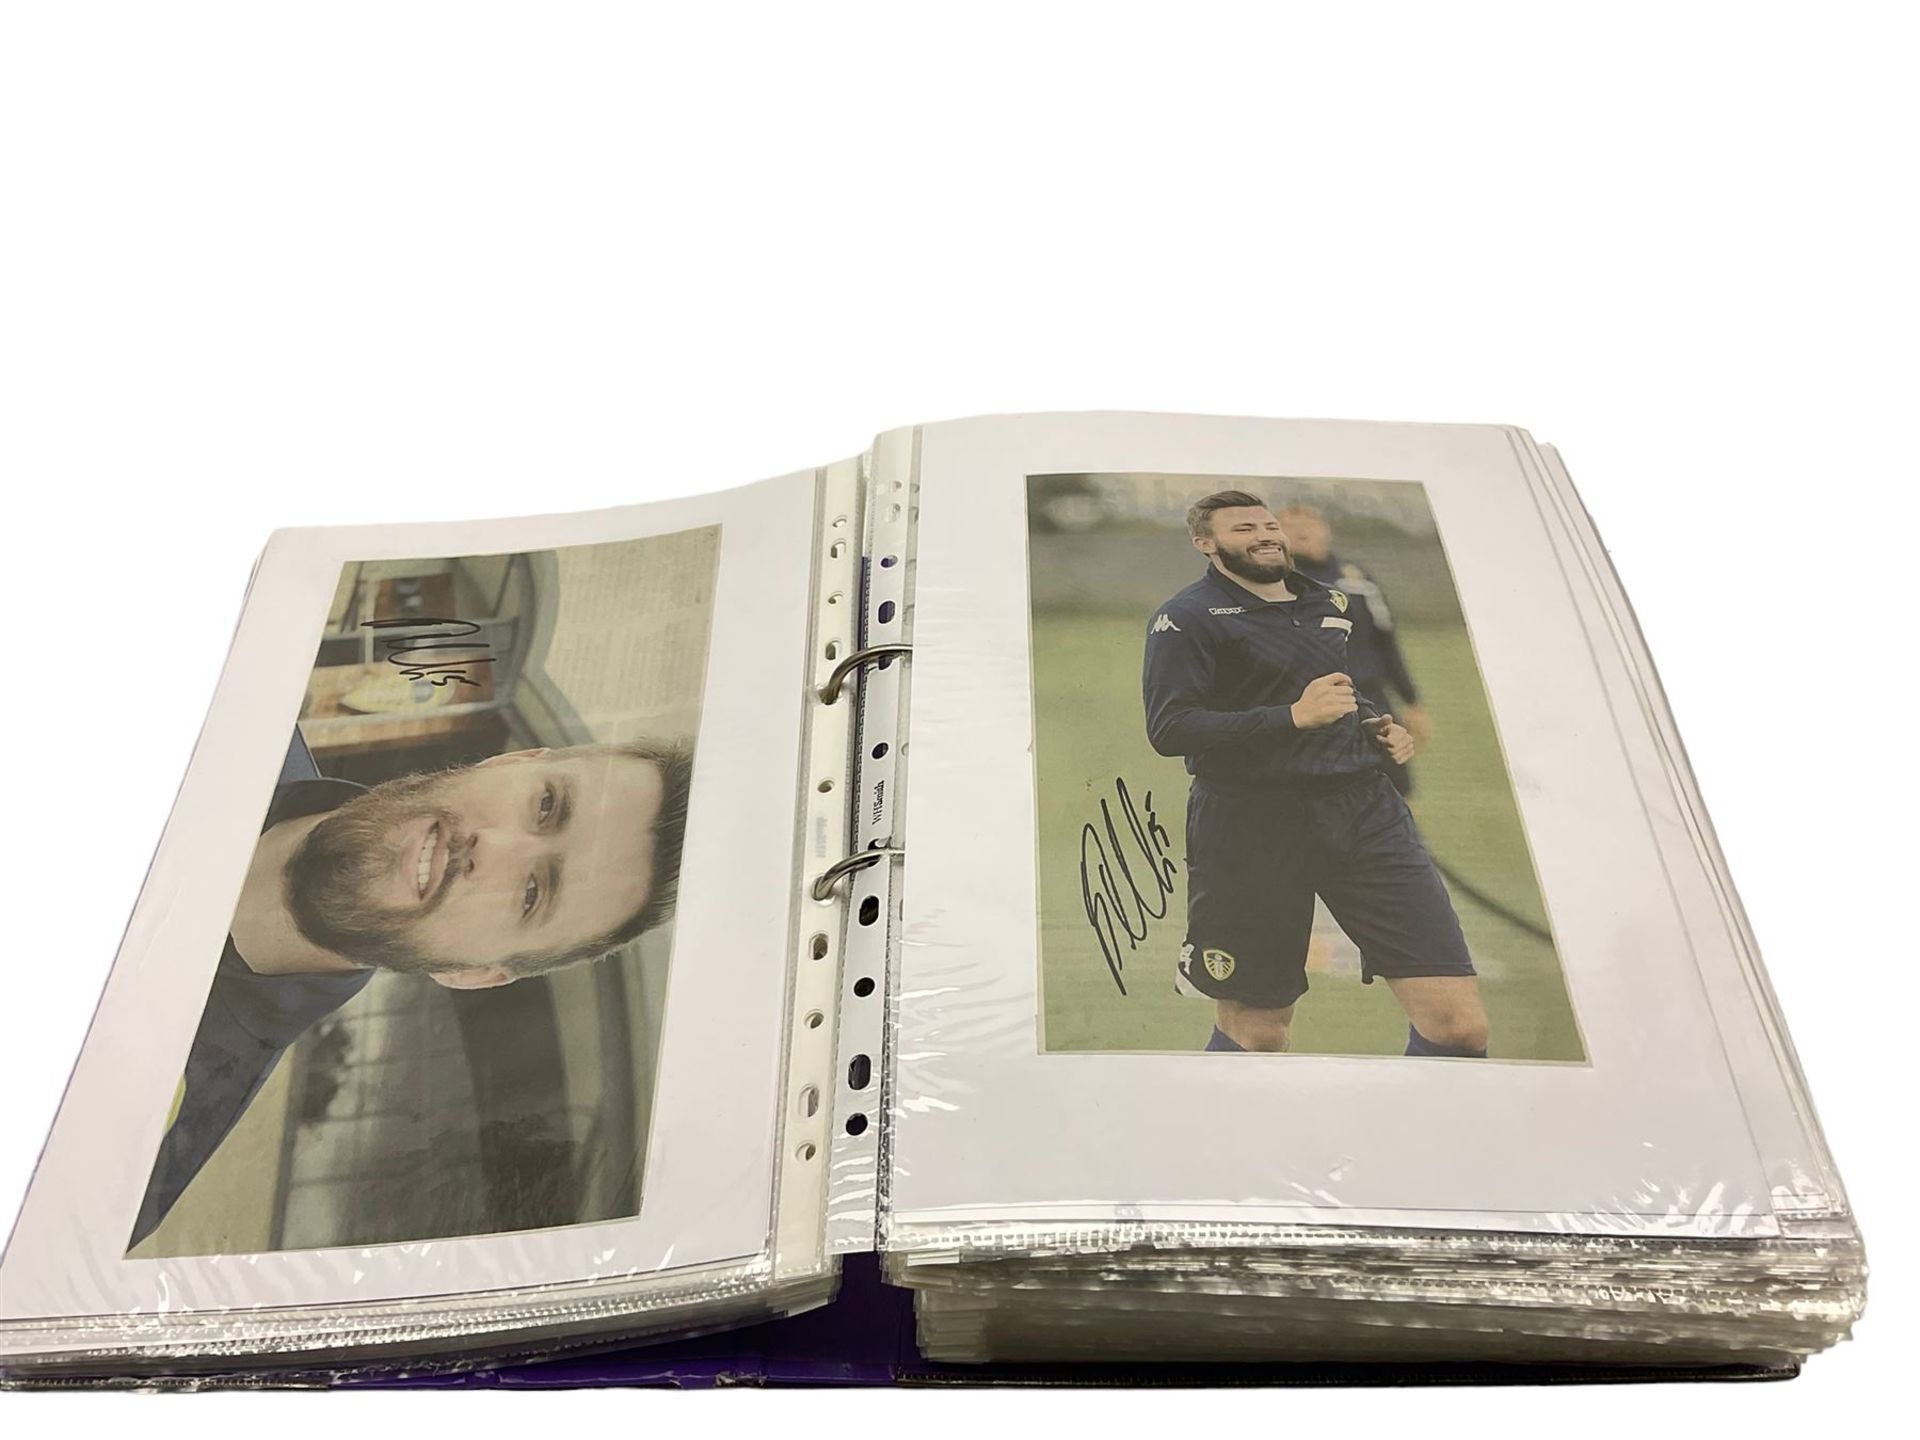 Leeds United football club - various autographs and signatures including Luke Varney - Image 7 of 10